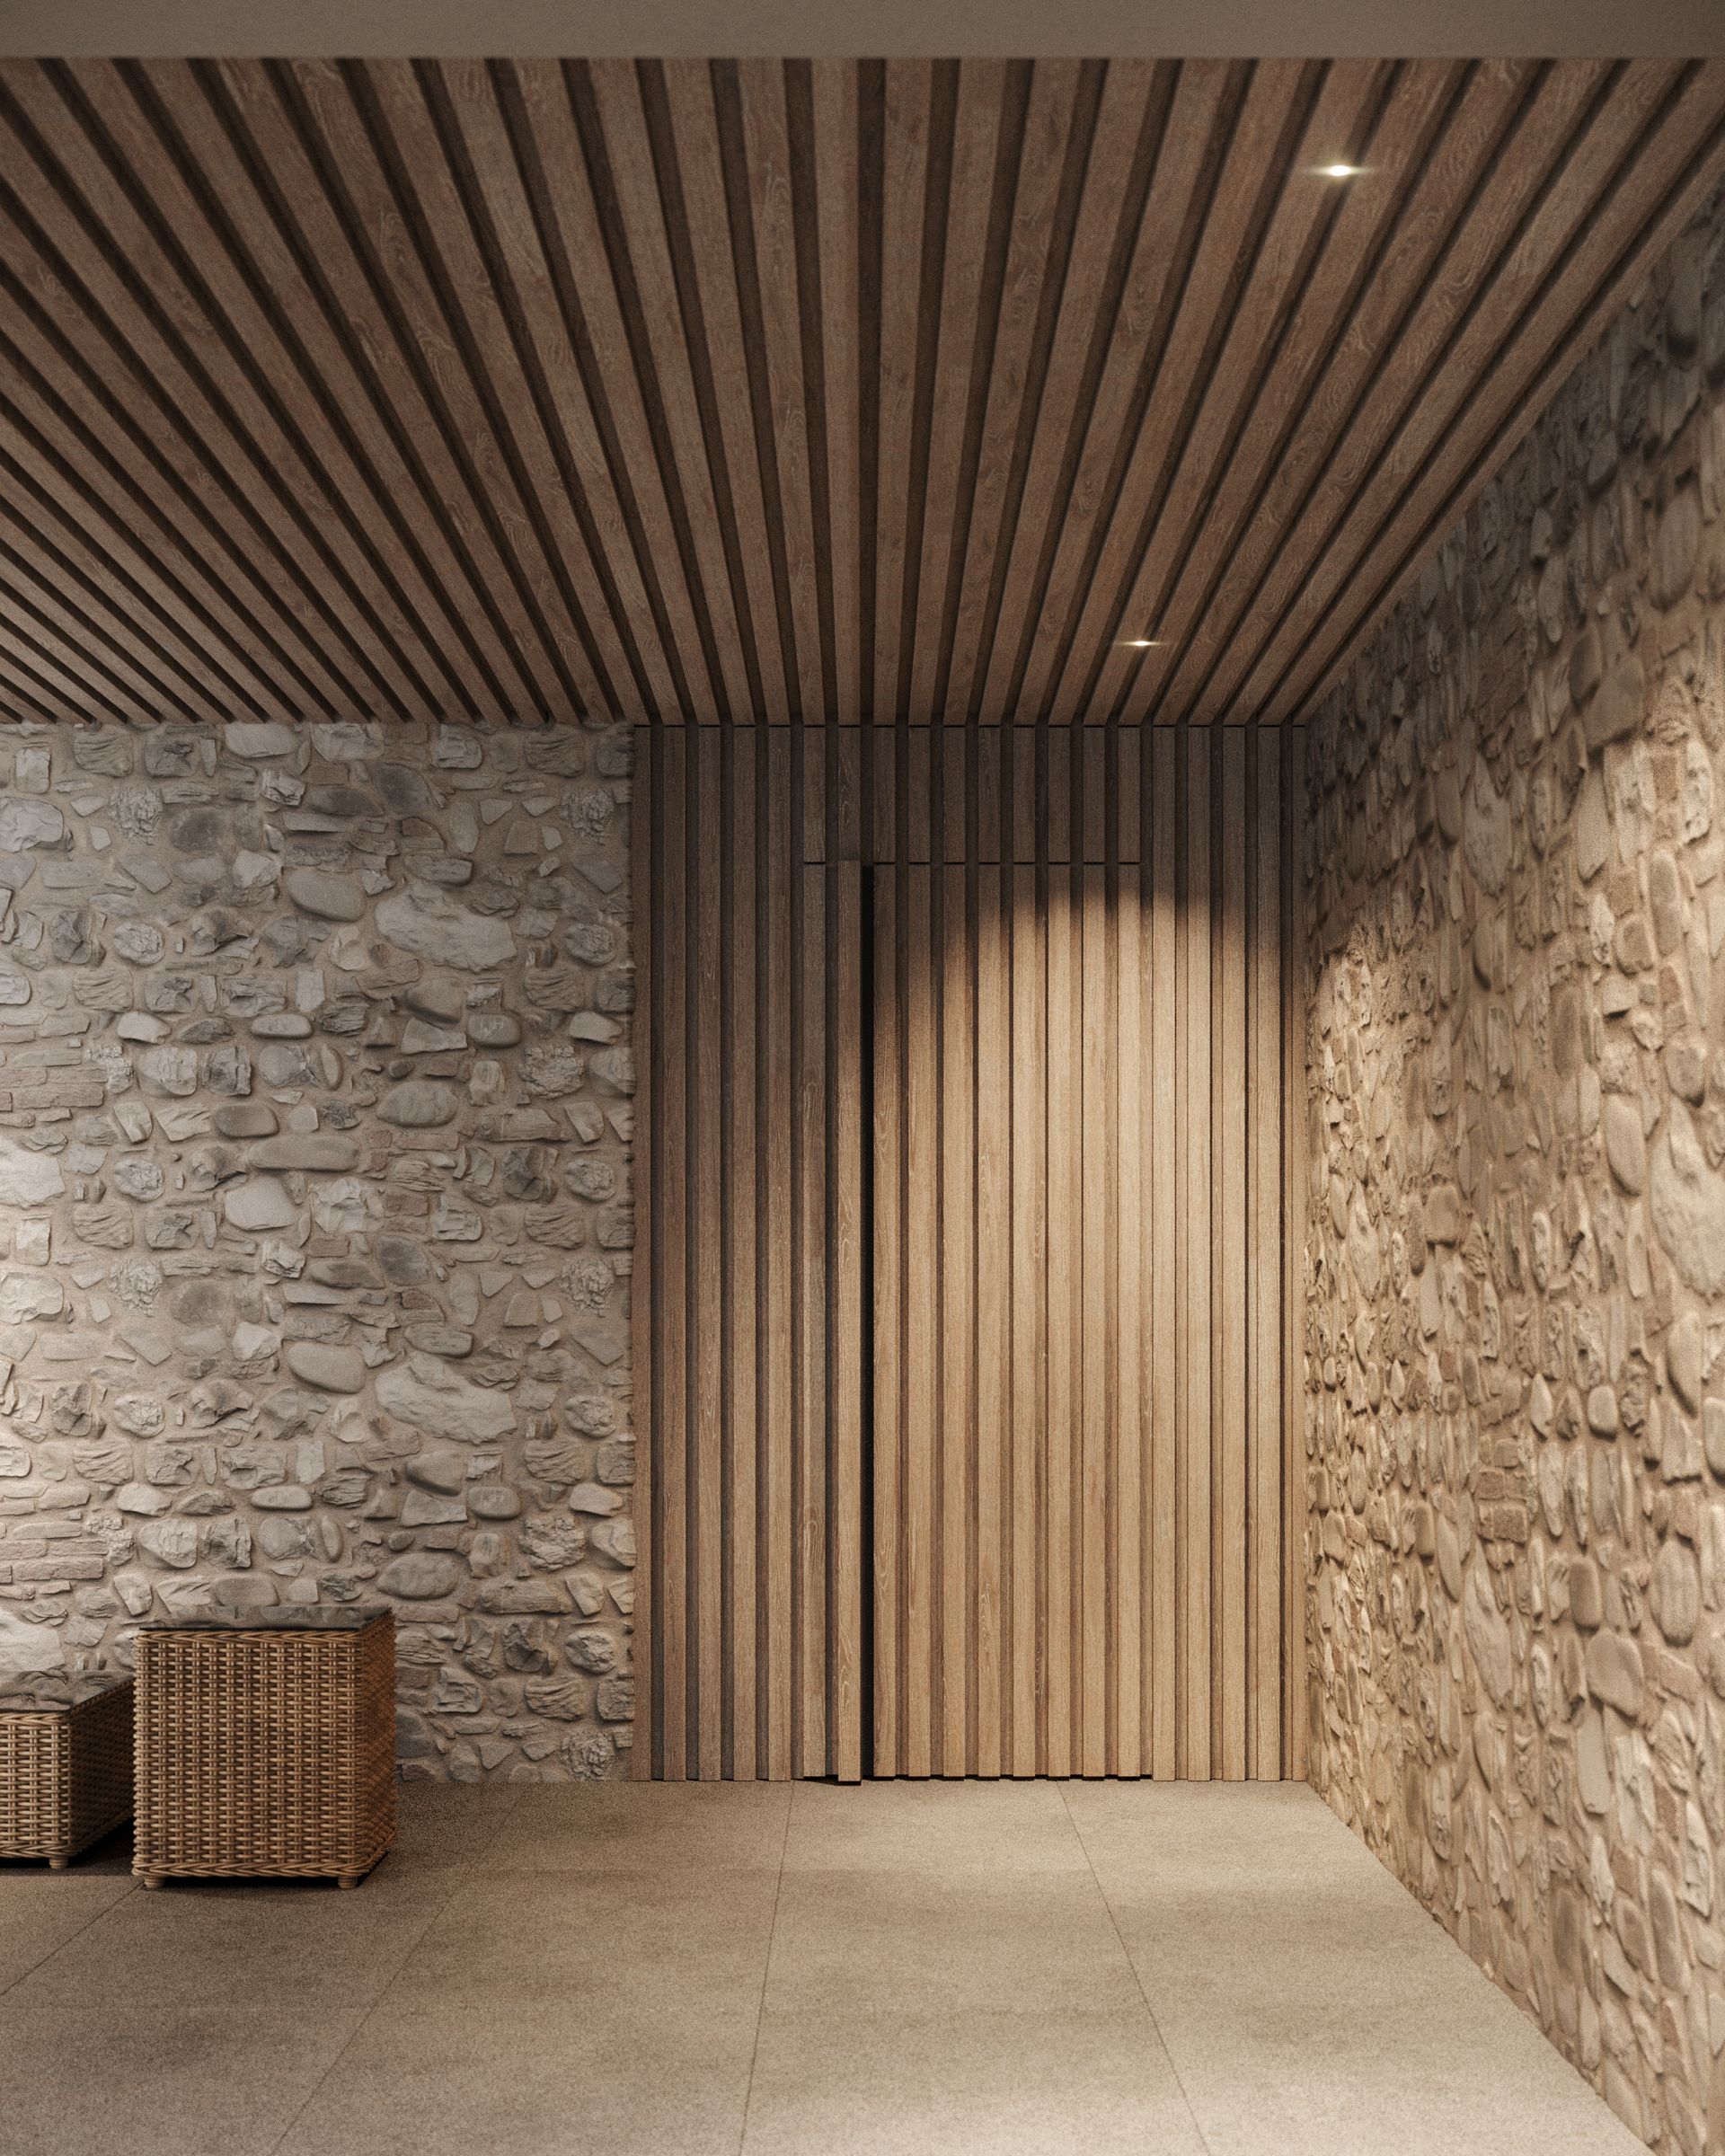 Exterior design project, redevelopment of existing building, wooden slat ceiling. Officina Magisafi architecture design - portico door rendering